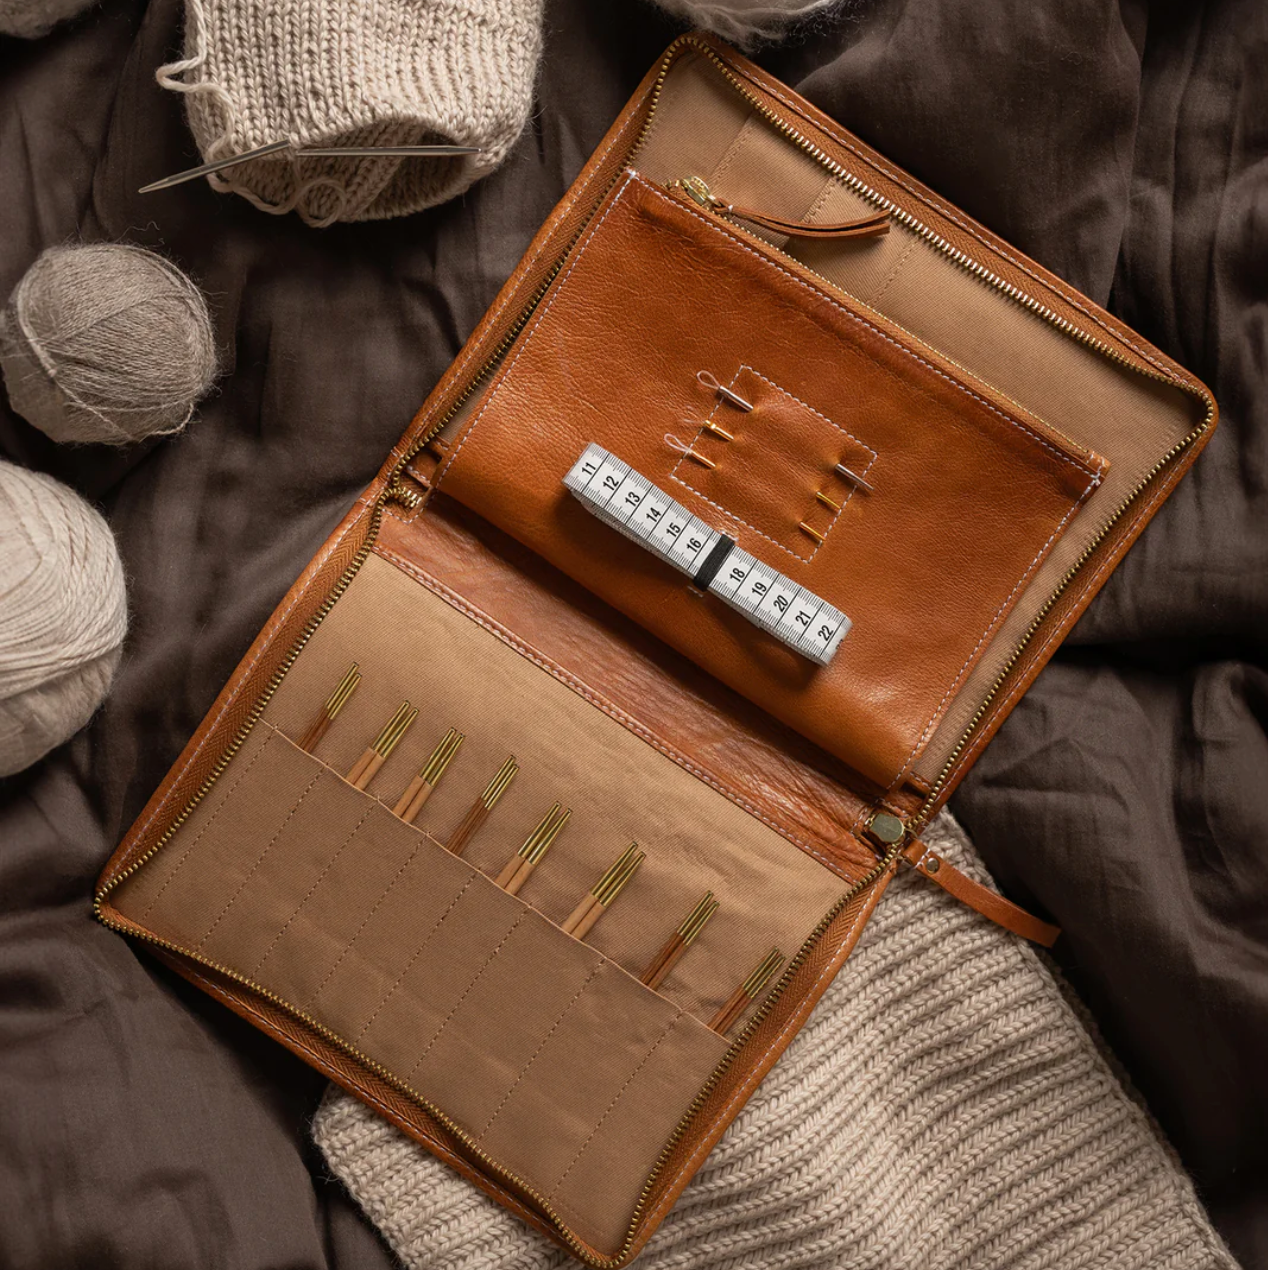 Re: Designed - Project 08 Knitting Case PREORDER